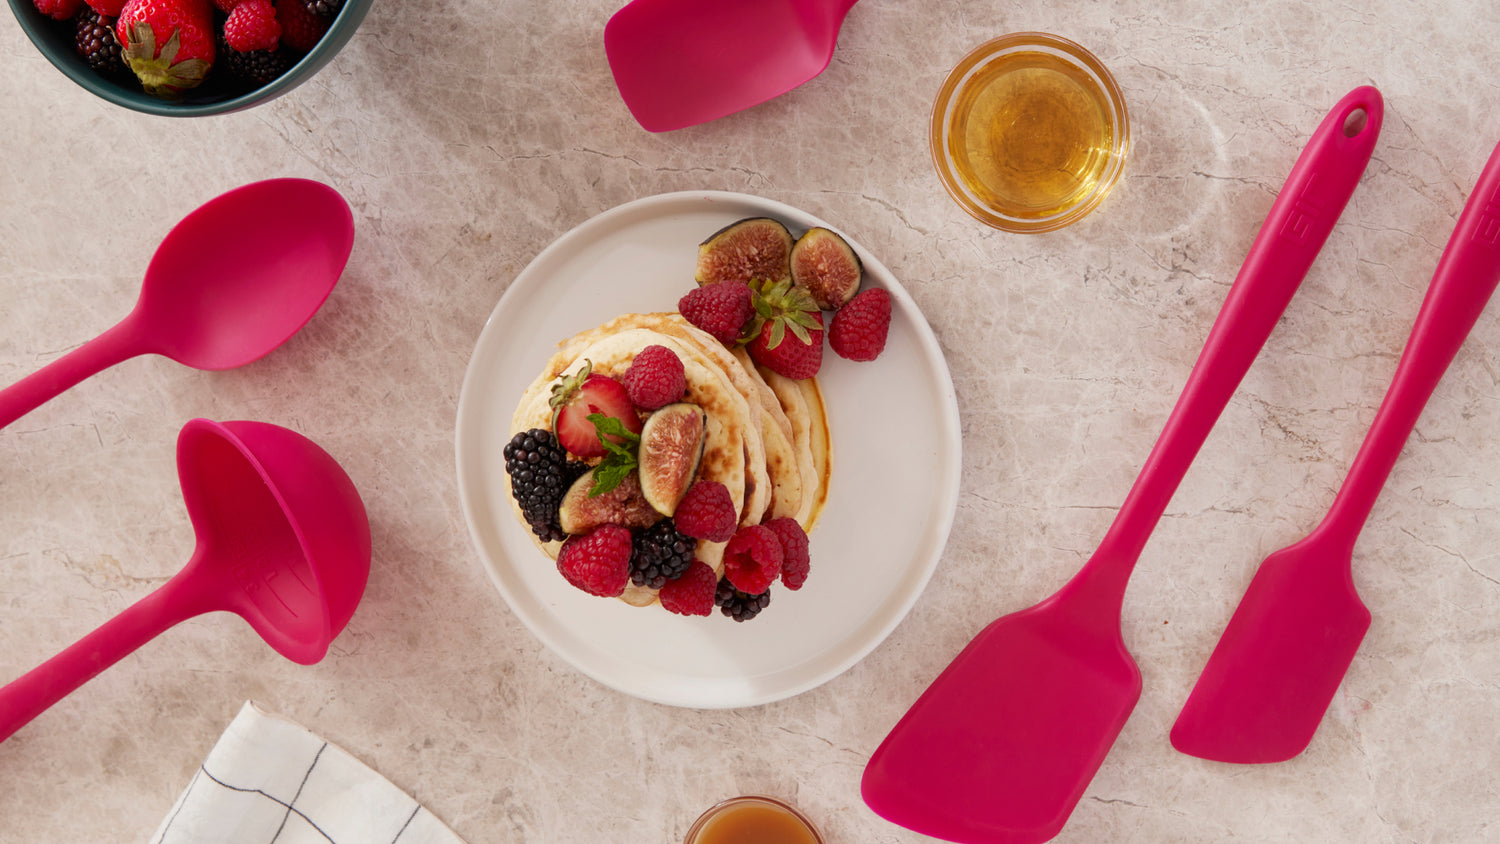 Over head shot of the Ruby GIR tools, with a plate of Pancakes and fruit on a marble background. 